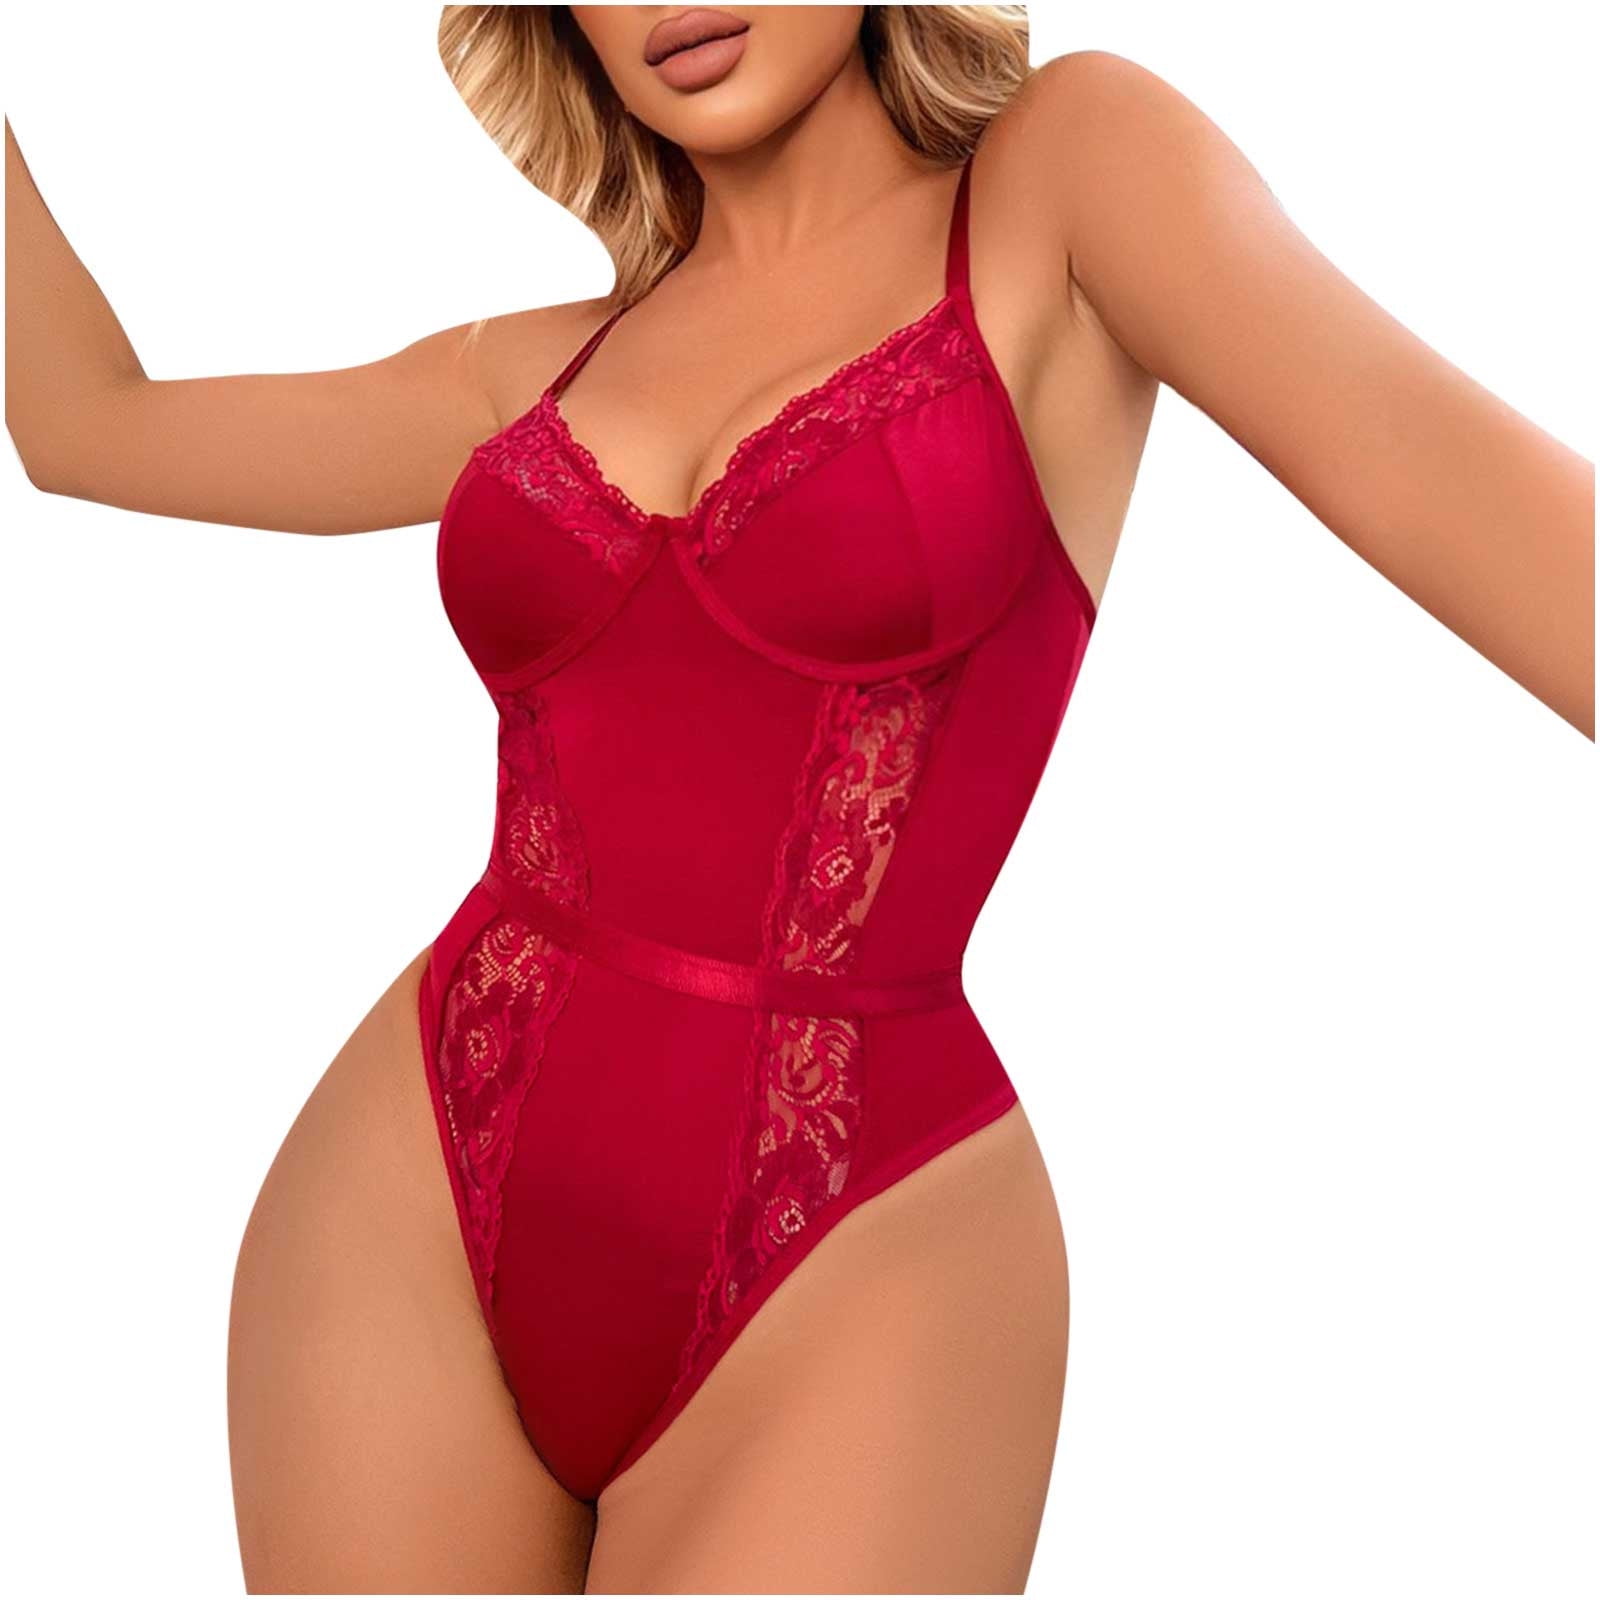 Xihbxyly Lingerie for Thick Women Ladies Cute Girl Solid Erotic Lingerie  Sexy Perspective Sling Slim Bodysuit Sexy Woman Lingerie Lace Lingerie